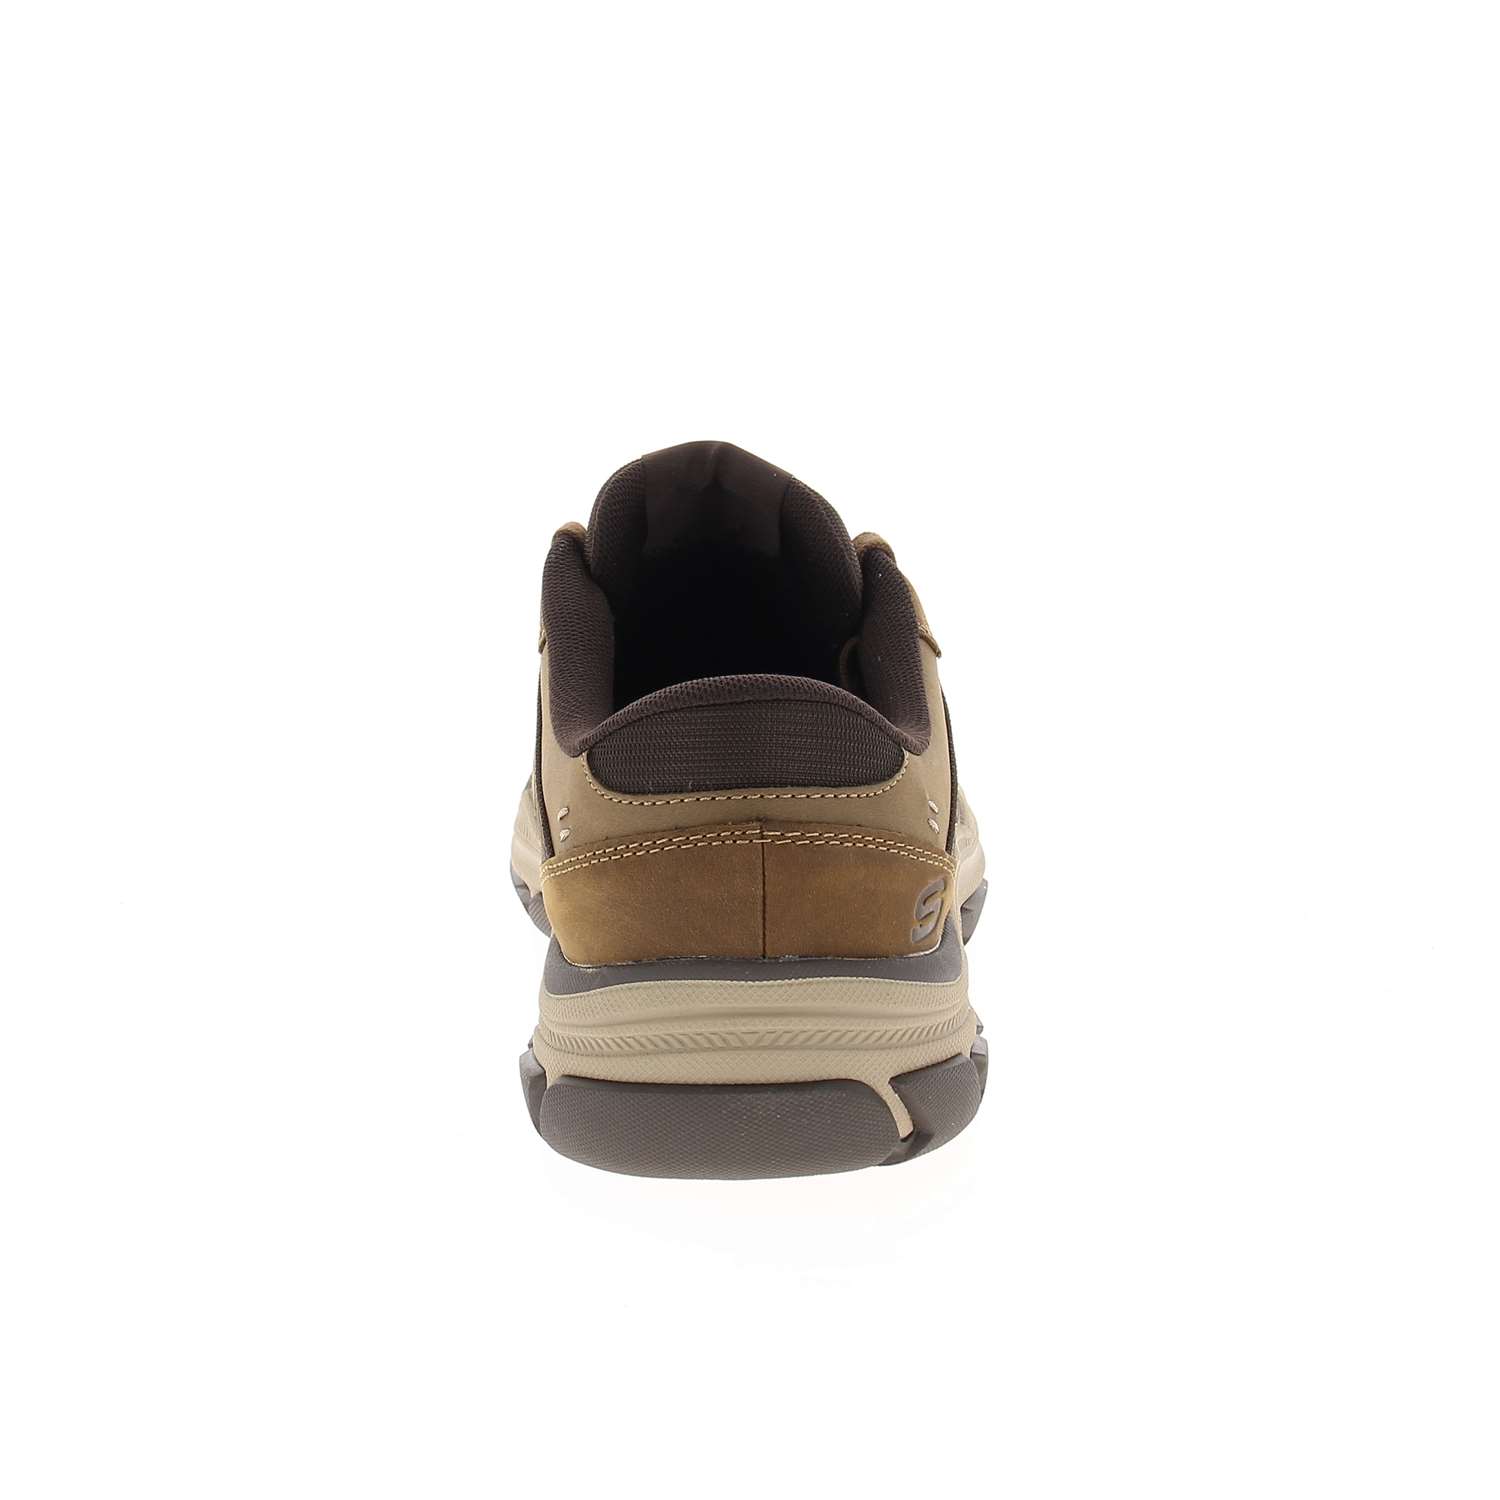 04 - RESPECTED RELAXED FIT - SKECHERS - Baskets - Nubuck